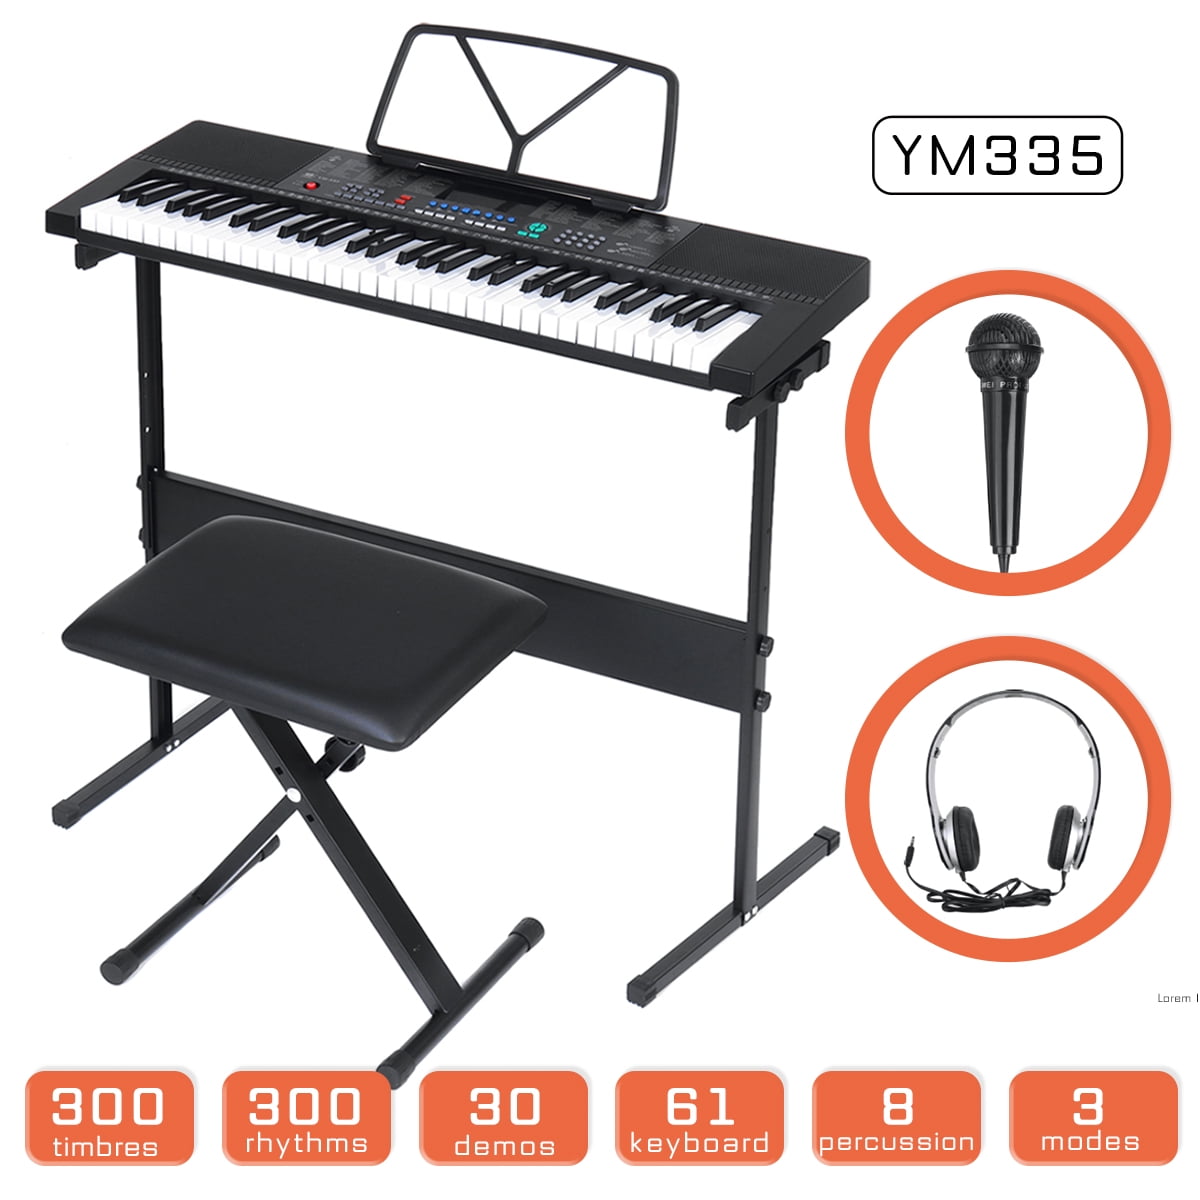 Microphone,Piano Stand,Full Size Keys/LCD Screen for Beginner Adults and Kids Mustar 61 Lighted Keys Teaching Electronic Keyboard Piano w/MIDI USB/Sturdy App Headphones